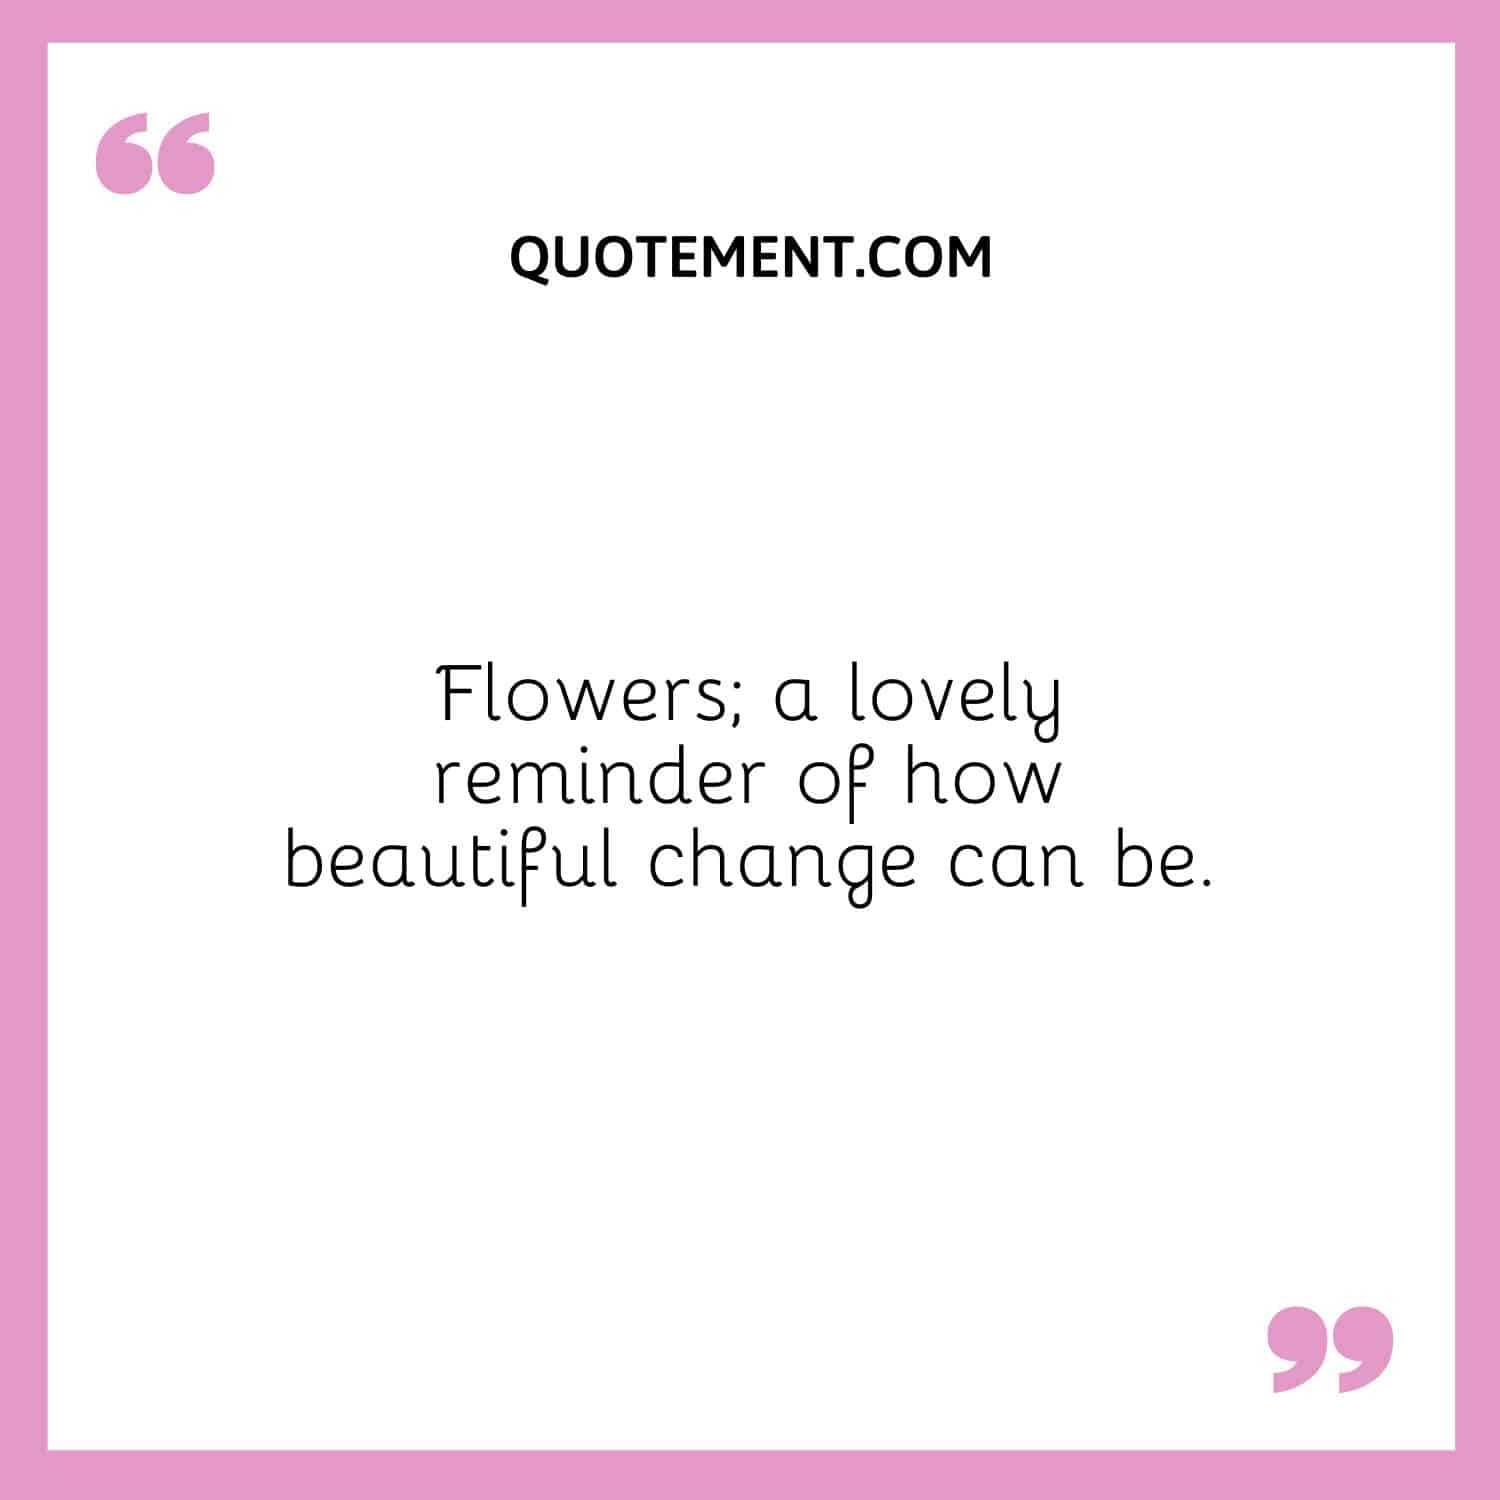 Flowers; a lovely reminder of how beautiful change can be